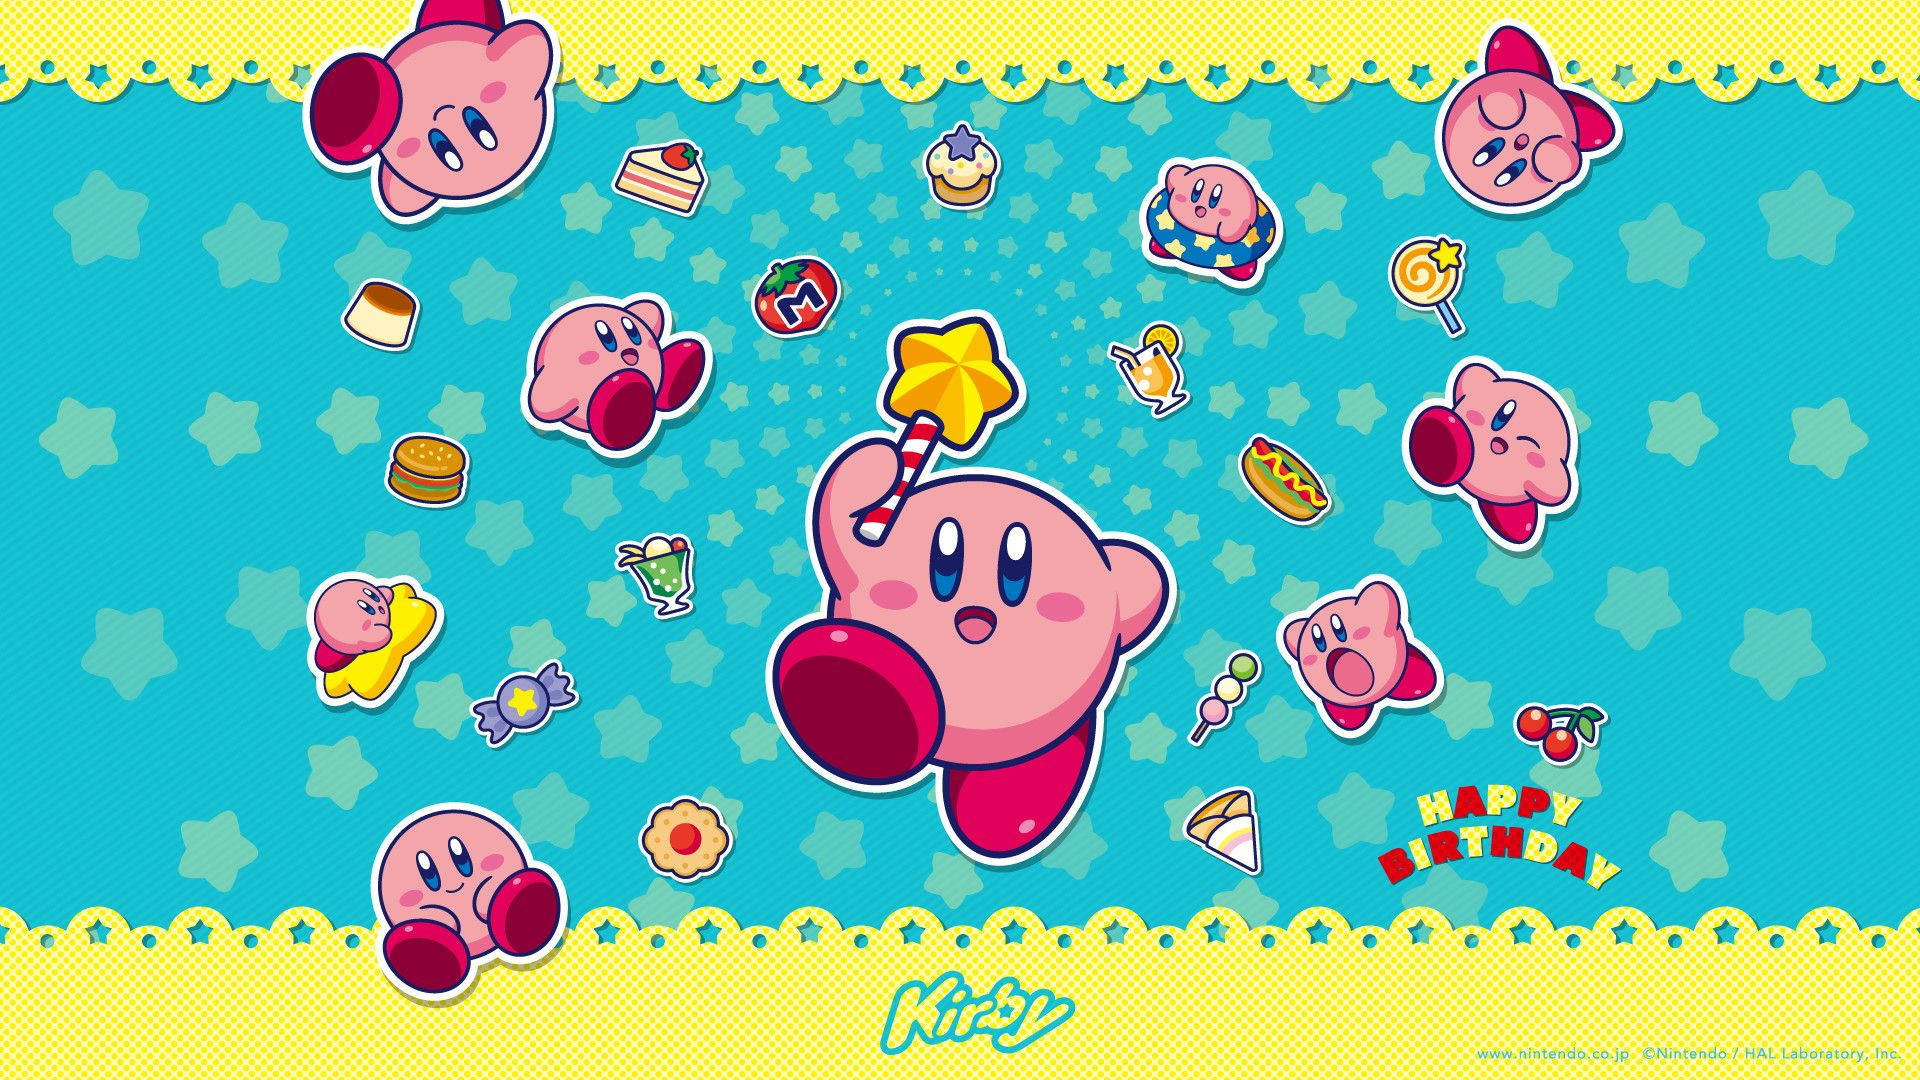 Cute Pink Aesthetic Kirby Background Hd Wallpaper